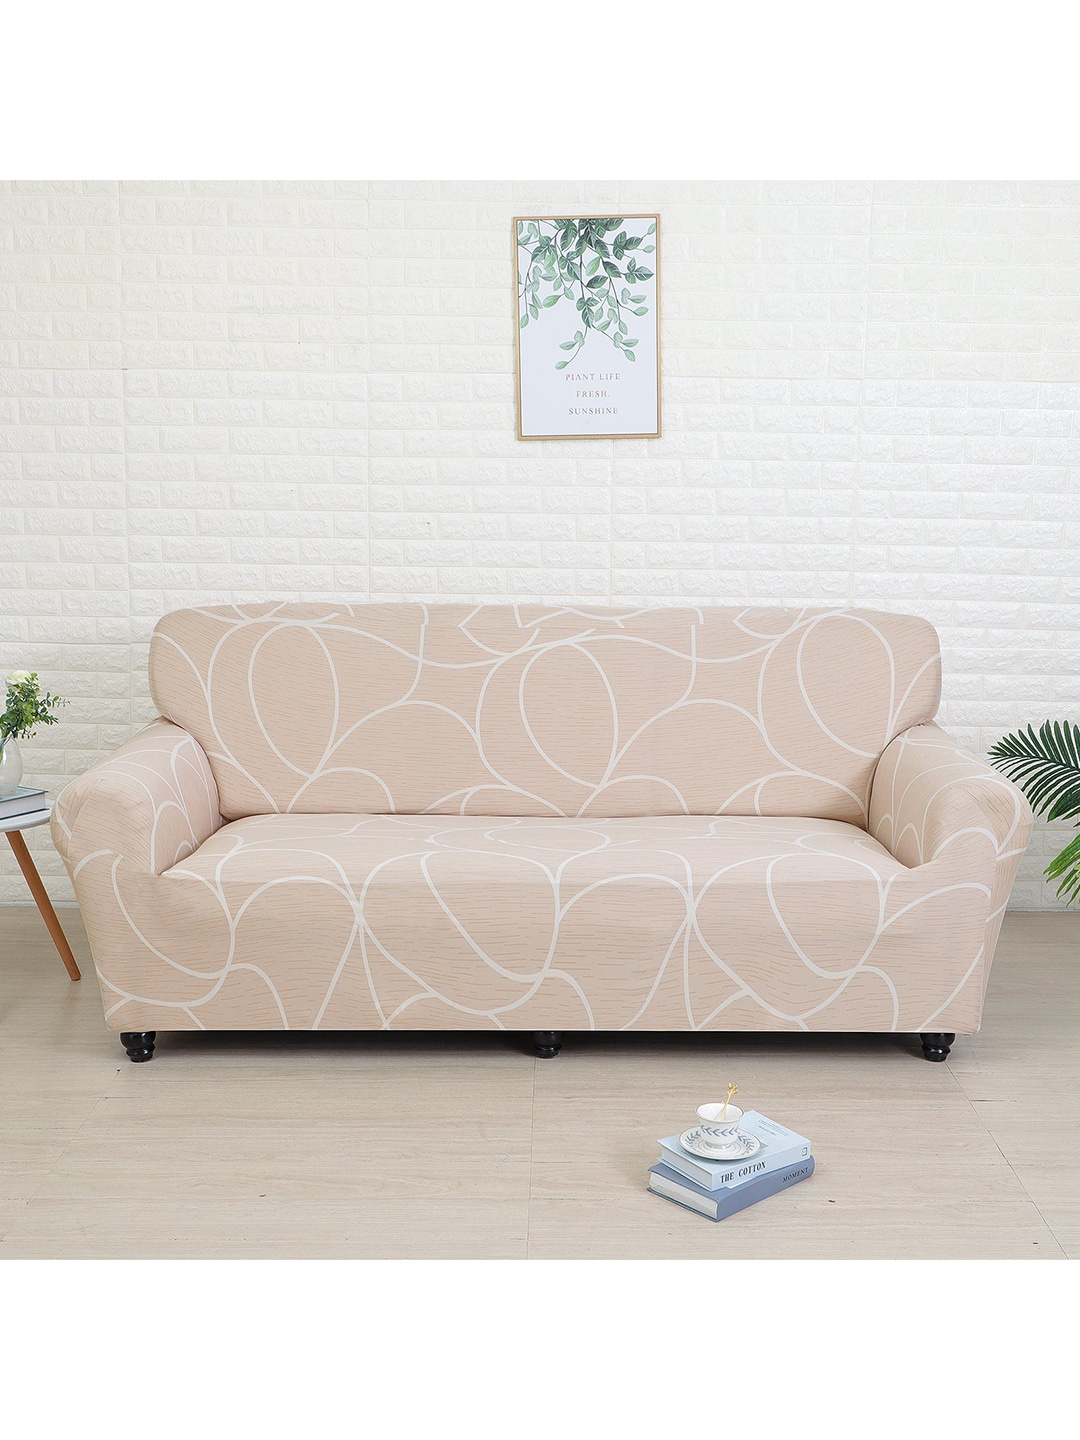 Athome by Nilkamal Peach-Coloured & White Printed 3 Seater Sofa Covers Price in India